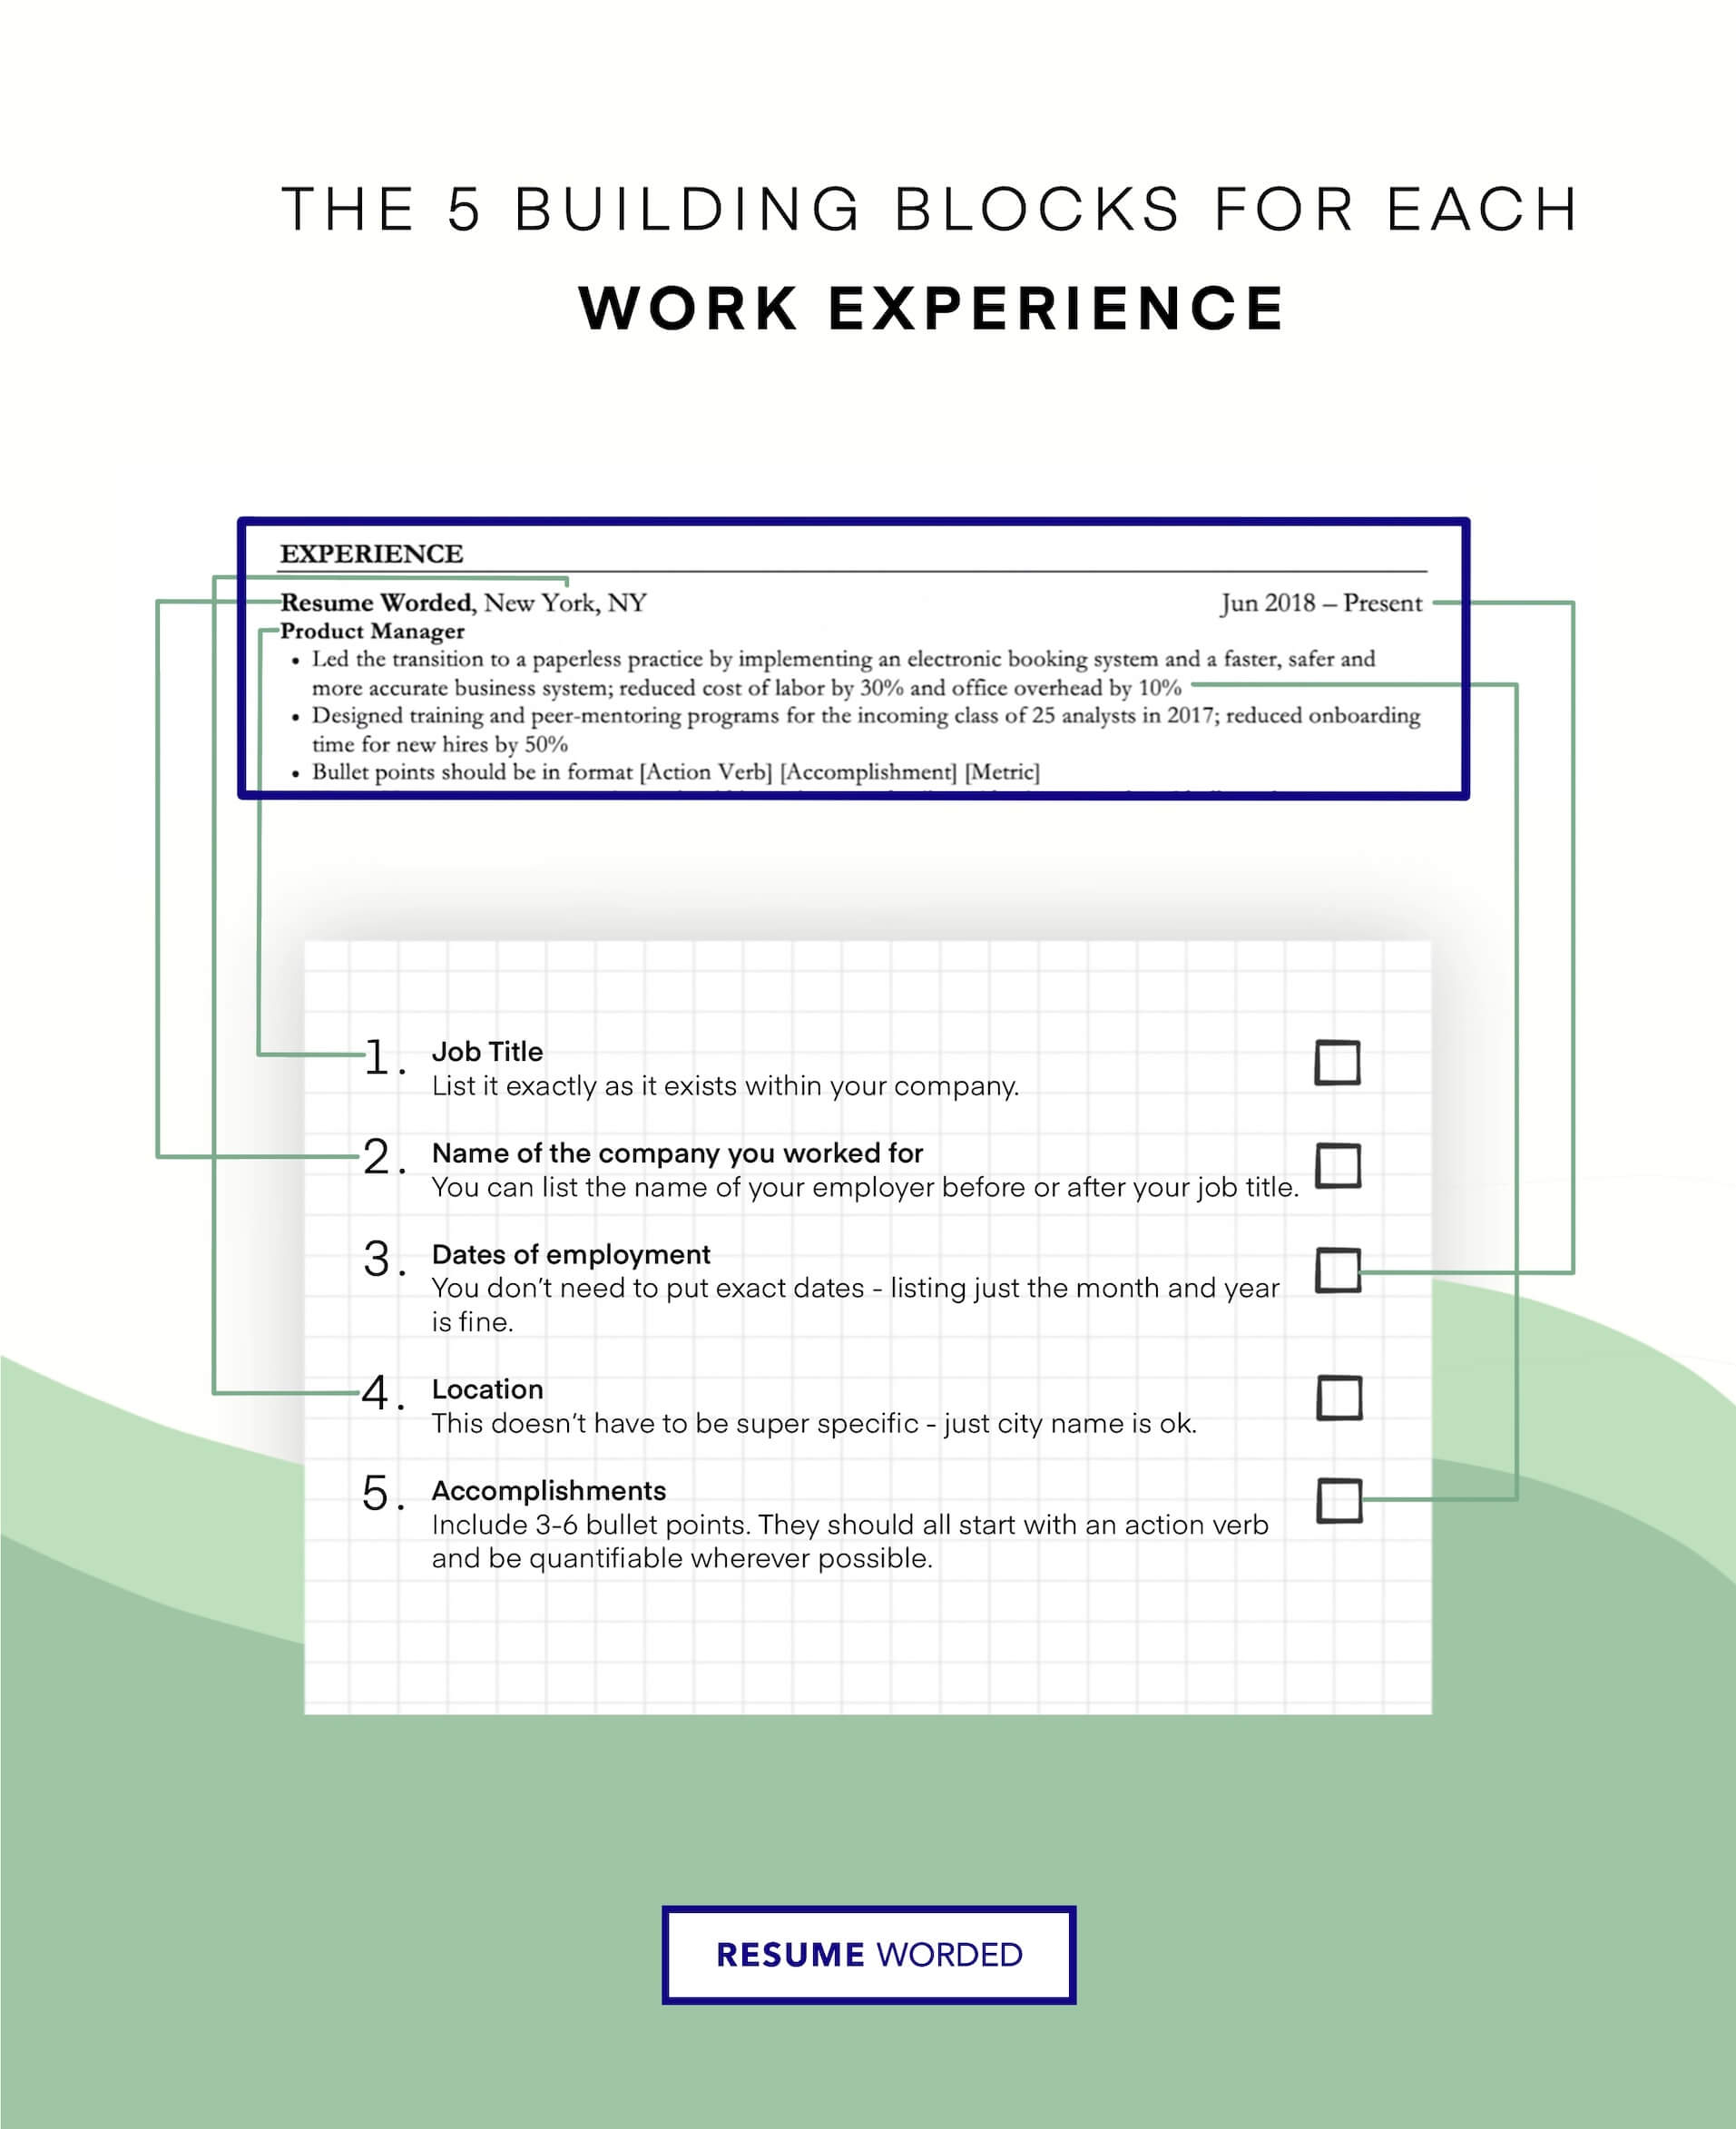 Include any other customer-facing experience. - Customer Service Agent Resume